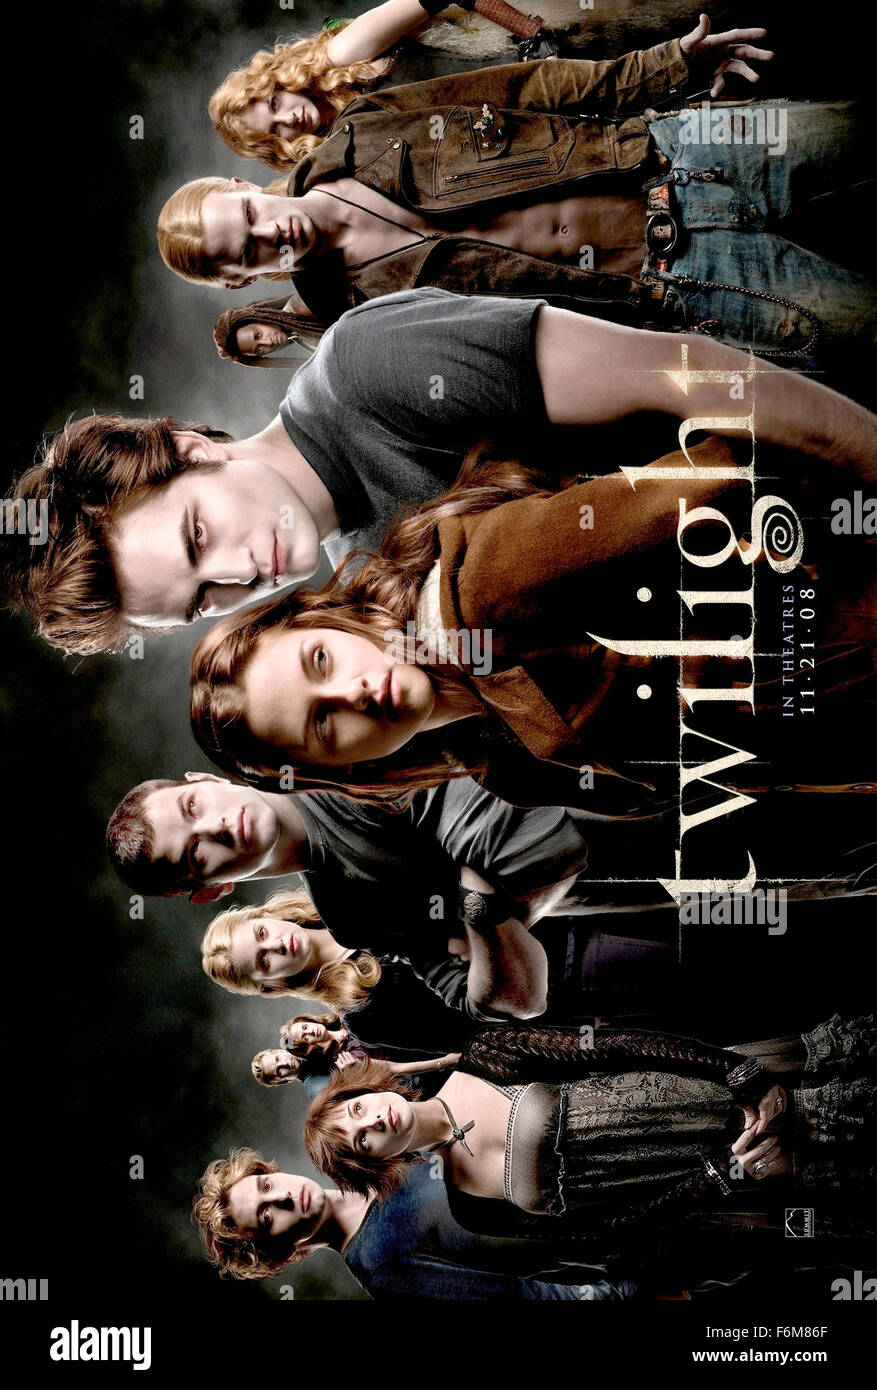 RELEASE DATE: November 21, 2008. MOVIE TITLE: Twilight. STUDIO: Summit Entertainment. PLOT: Bella Swan is a clumsy, kind hearted teenager with a knack for getting into trouble. Edward Cullen is an intelligent, good looking vampire who is trying to hide his secret. Against all odds, the two fall in love but will a pack of blood thirsty trackers and the disapproval of their family and friends separate them? PICTURED: . Stock Photo